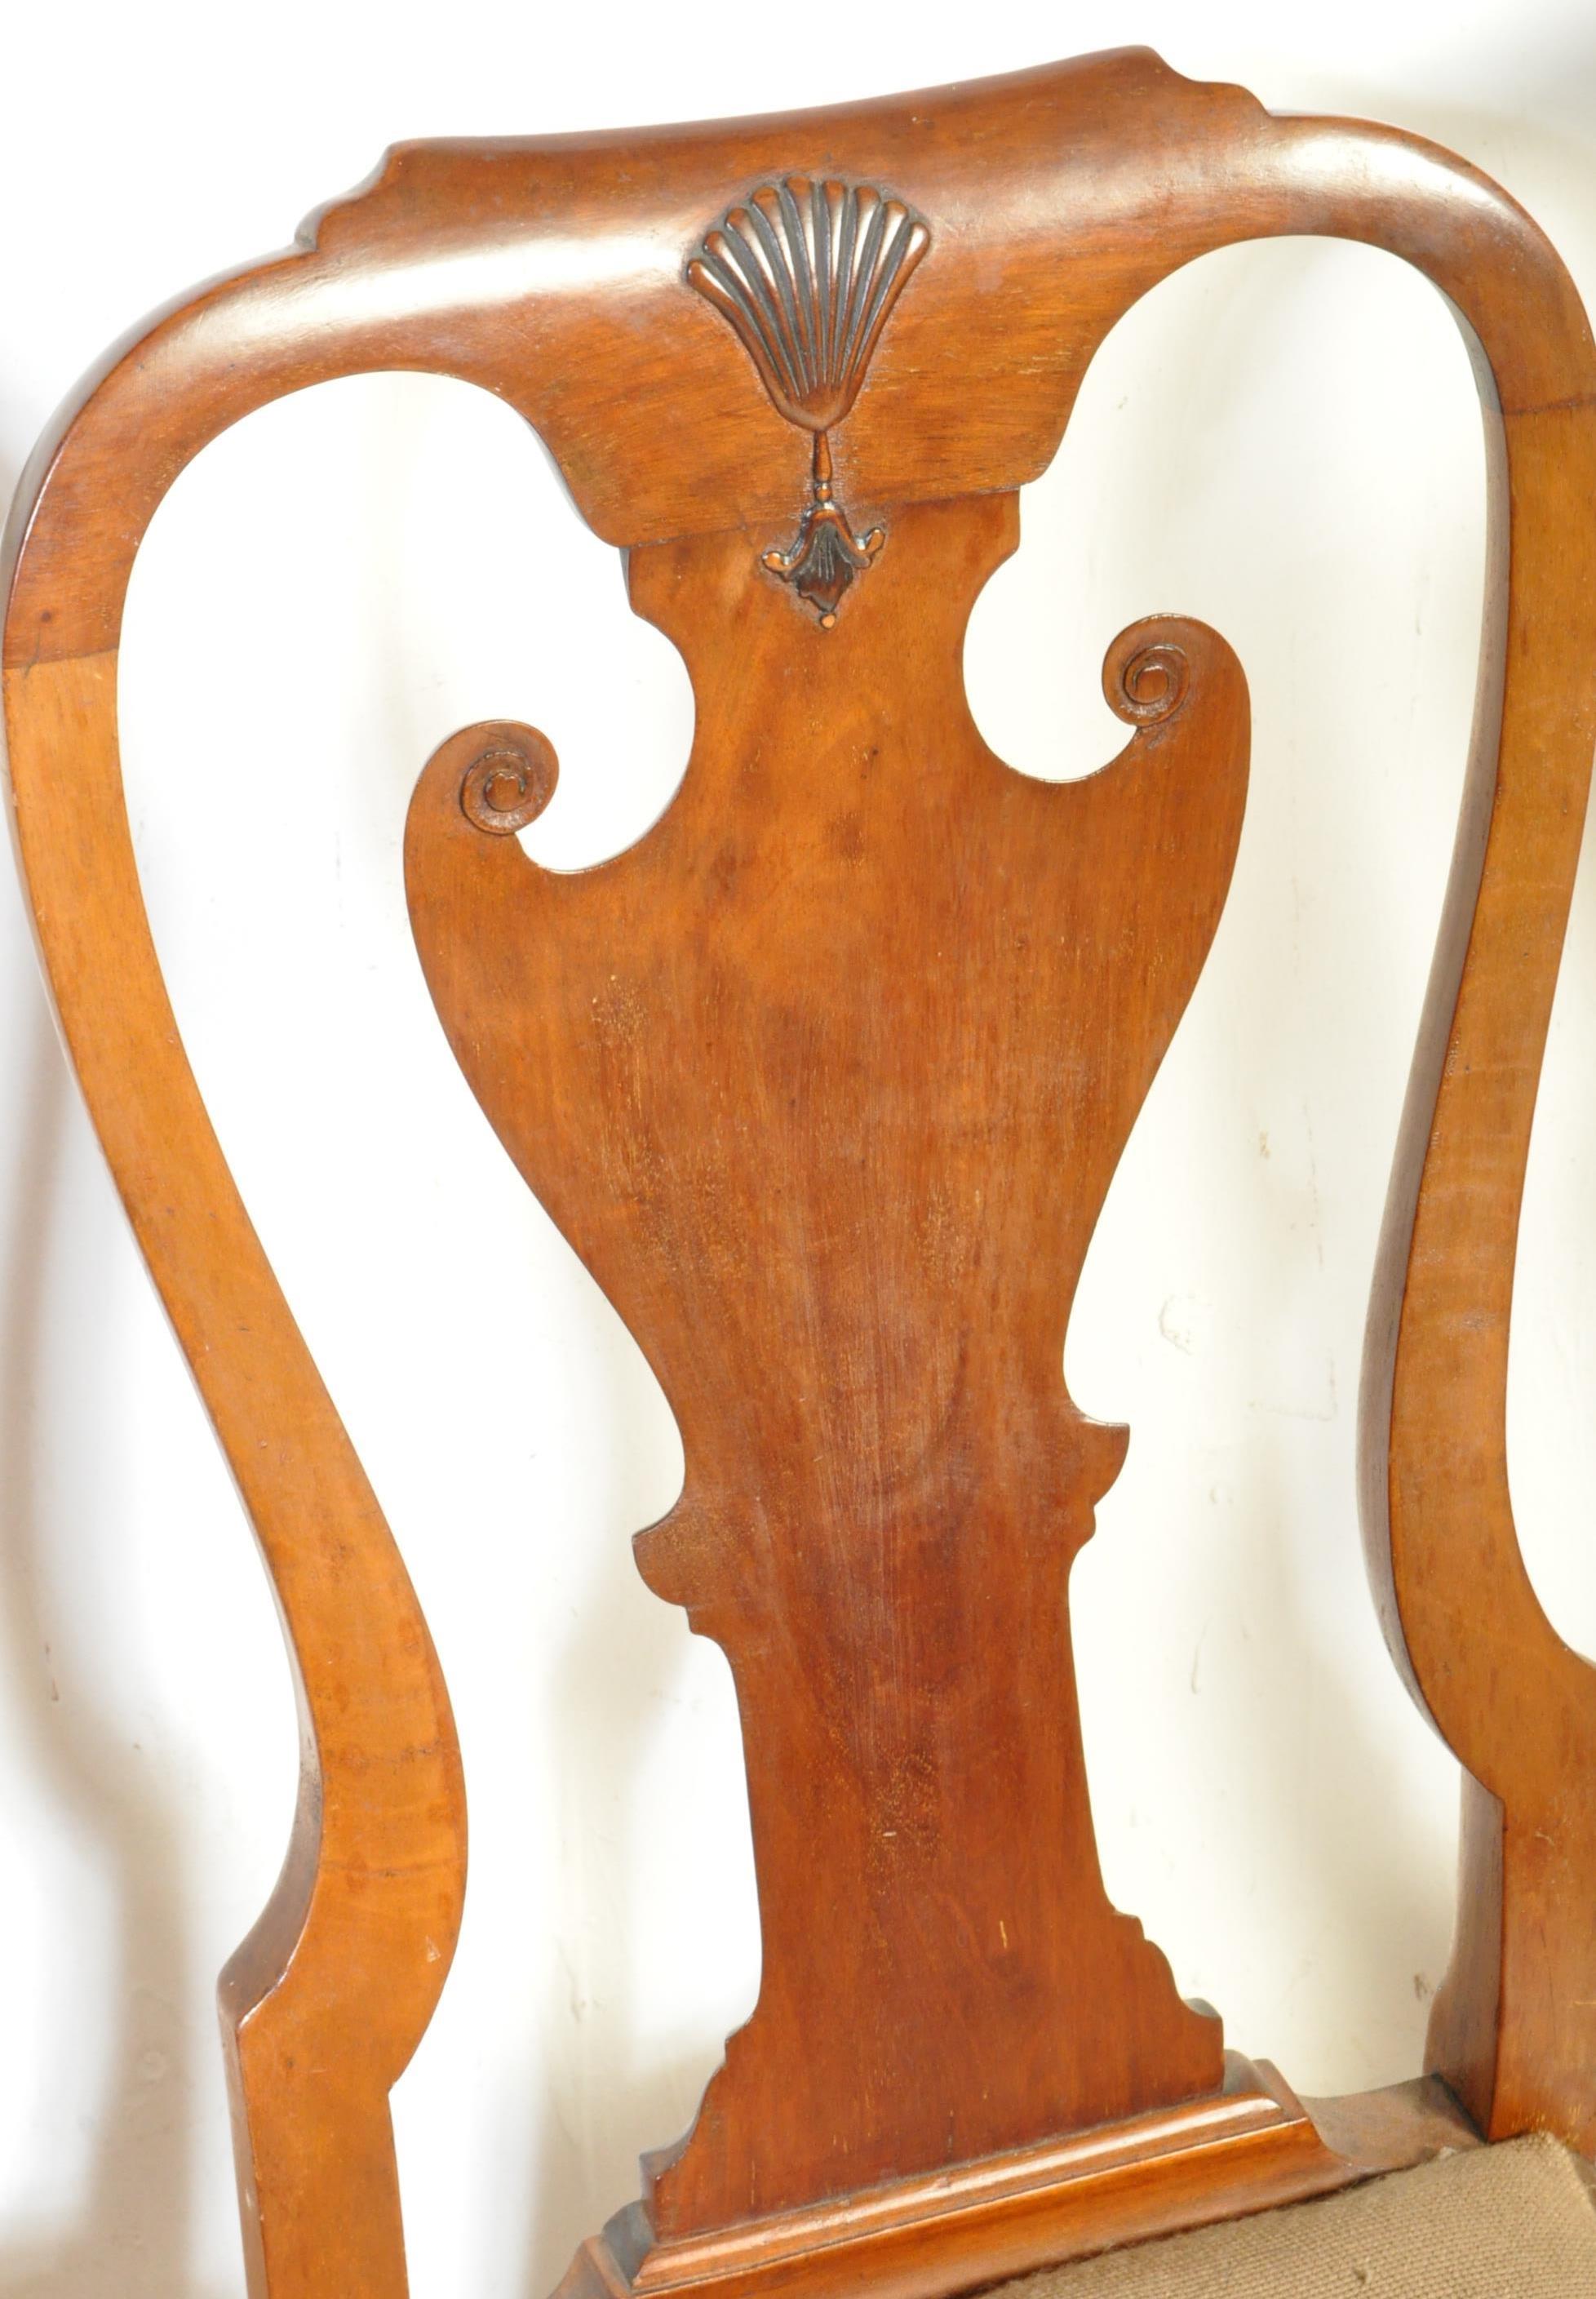 SET OF 4 EDWARDIAN QUEEN ANNE MAHOGANY DINING CHAIRS - Image 3 of 5